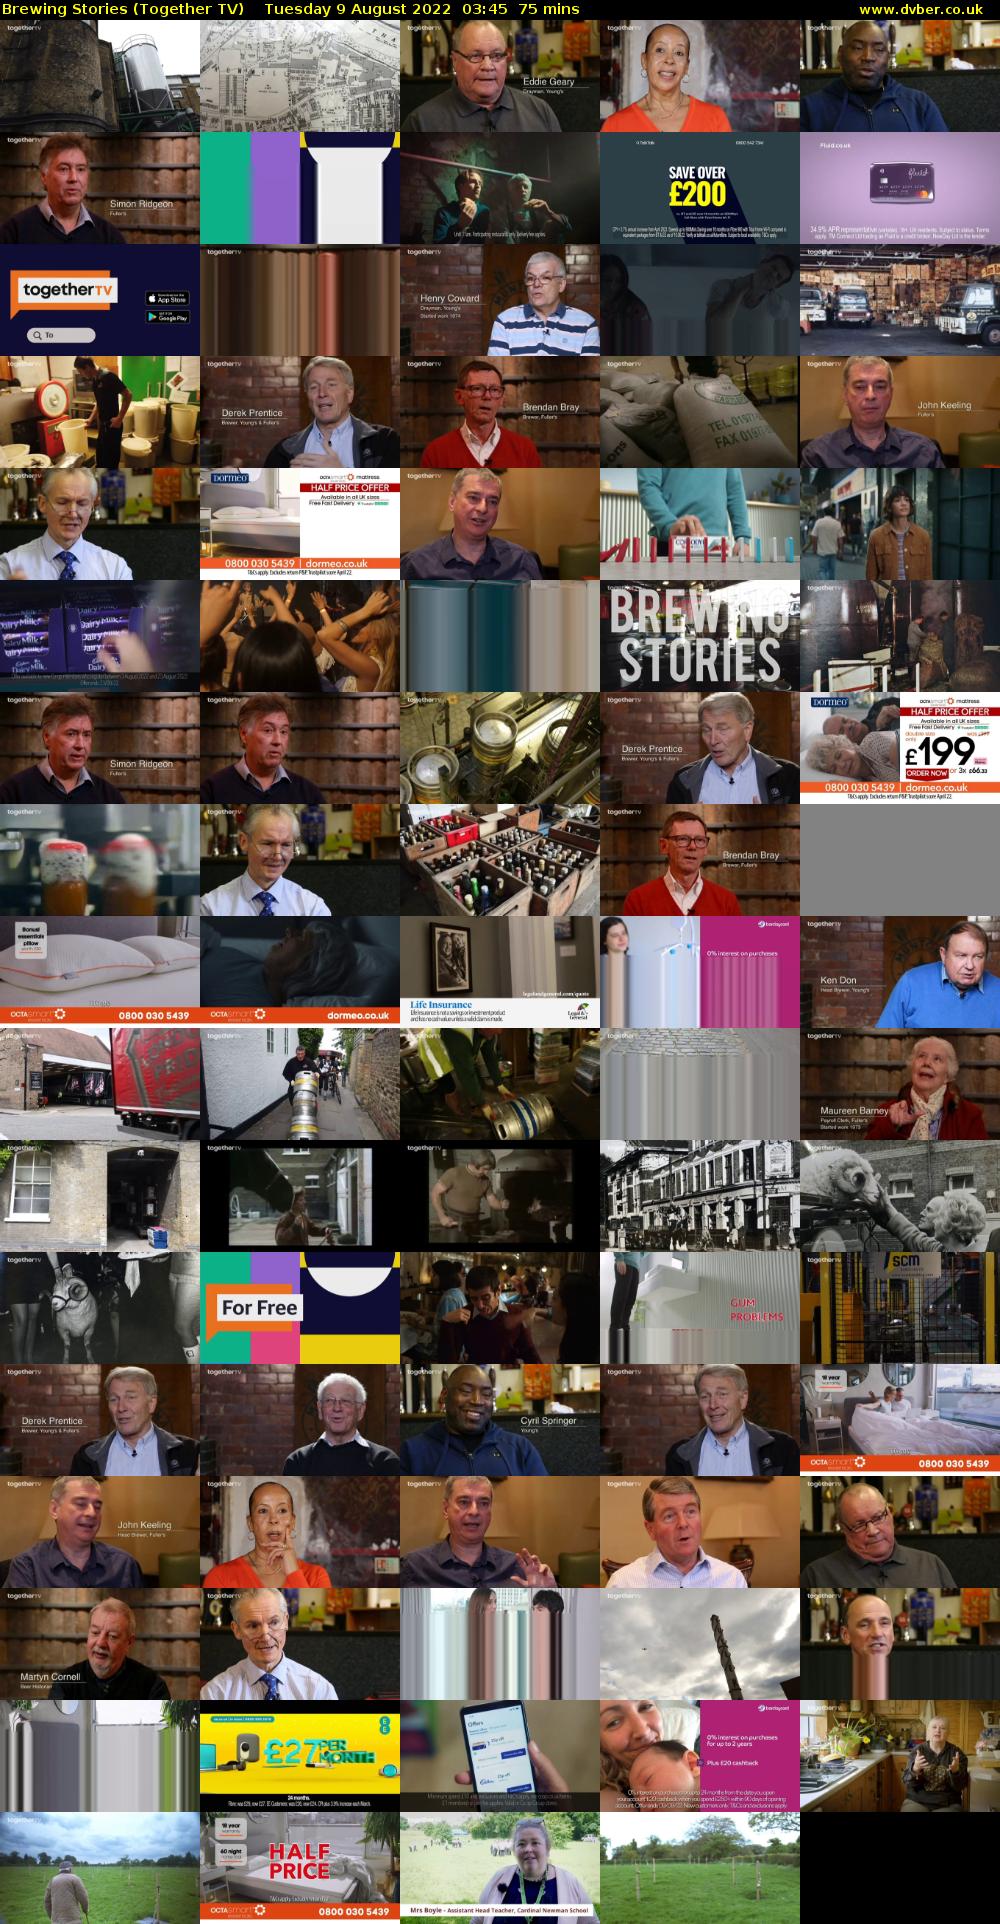 Brewing Stories (Together TV) Tuesday 9 August 2022 03:45 - 05:00